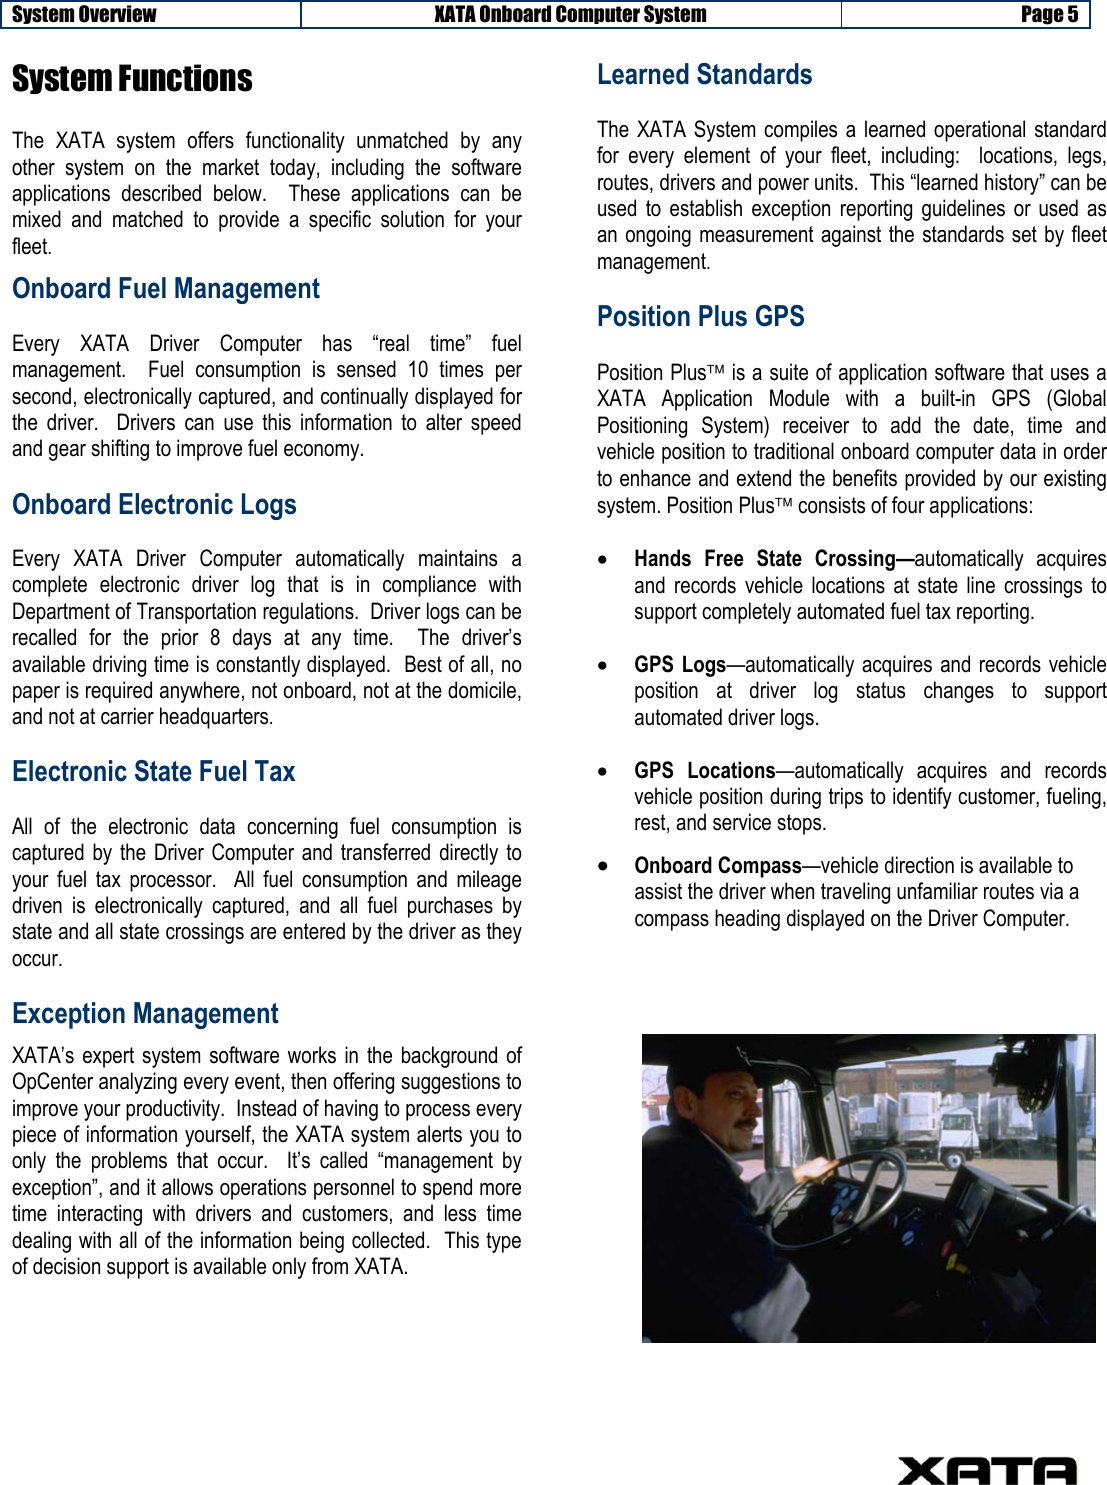 System Overview XATA Onboard Computer System  Page 5     System Functions  The XATA system offers functionality unmatched by any other system on the market today, including the software applications described below.  These applications can be mixed and matched to provide a specific solution for your fleet.  Onboard Fuel Management Every XATA Driver Computer has “real time” fuel management.  Fuel consumption is sensed 10 times per second, electronically captured, and continually displayed for the driver.  Drivers can use this information to alter speed and gear shifting to improve fuel economy. Onboard Electronic Logs Every XATA Driver Computer automatically maintains a complete electronic driver log that is in compliance with Department of Transportation regulations.  Driver logs can be recalled for the prior 8 days at any time.  The driver’s available driving time is constantly displayed.  Best of all, no paper is required anywhere, not onboard, not at the domicile, and not at carrier headquarters. Electronic State Fuel Tax All of the electronic data concerning fuel consumption is captured by the Driver Computer and transferred directly to your fuel tax processor.  All fuel consumption and mileage driven is electronically captured, and all fuel purchases by state and all state crossings are entered by the driver as they occur. Exception Management XATA’s expert system software works in the background of OpCenter analyzing every event, then offering suggestions to improve your productivity.  Instead of having to process every piece of information yourself, the XATA system alerts you to only the problems that occur.  It’s called “management by exception”, and it allows operations personnel to spend more time interacting with drivers and customers, and less time dealing with all of the information being collected.  This type of decision support is available only from XATA.   Learned Standards The XATA System compiles a learned operational standard for every element of your fleet, including:  locations, legs, routes, drivers and power units.  This “learned history” can be used to establish exception reporting guidelines or used as an ongoing measurement against the standards set by fleet management. Position Plus GPS Position Plus is a suite of application software that uses a XATA Application Module with a built-in GPS (Global Positioning System) receiver to add the date, time and vehicle position to traditional onboard computer data in order to enhance and extend the benefits provided by our existing system. Position Plus consists of four applications: • Hands Free State Crossing—automatically acquires and records vehicle locations at state line crossings to support completely automated fuel tax reporting. • GPS Logs—automatically acquires and records vehicle position at driver log status changes to support automated driver logs. • GPS Locations—automatically acquires and records vehicle position during trips to identify customer, fueling, rest, and service stops. • Onboard Compass—vehicle direction is available to assist the driver when traveling unfamiliar routes via a compass heading displayed on the Driver Computer. 